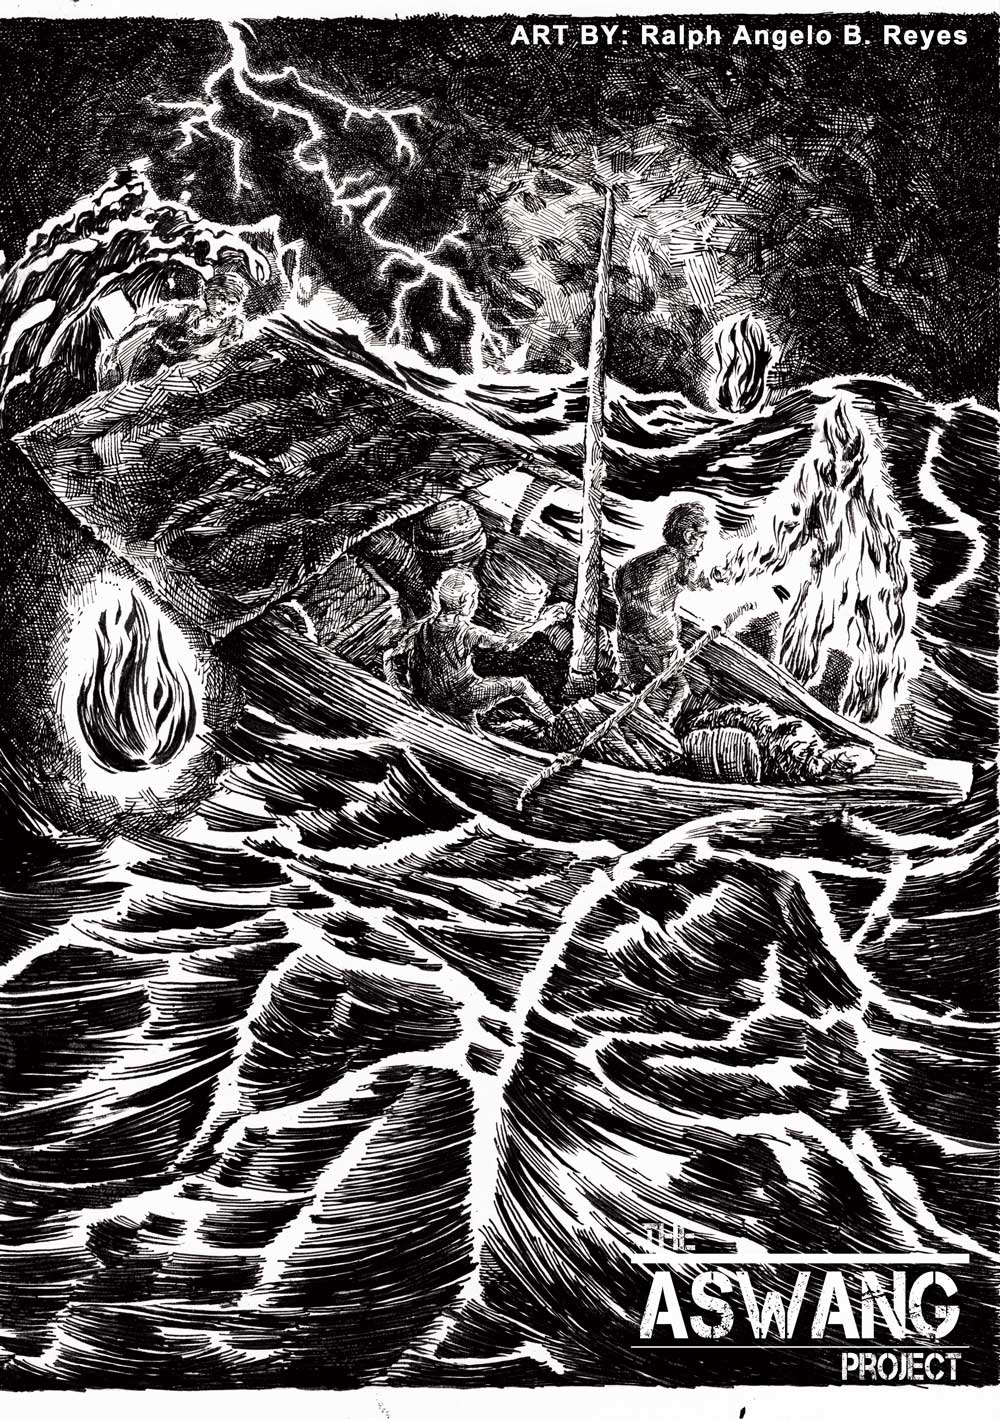 A pen and ink sketch of Santilmo flames attacking a boat in the middle of a stormy sea. The few crew members of the small boat struggle to keep the flames at bay.